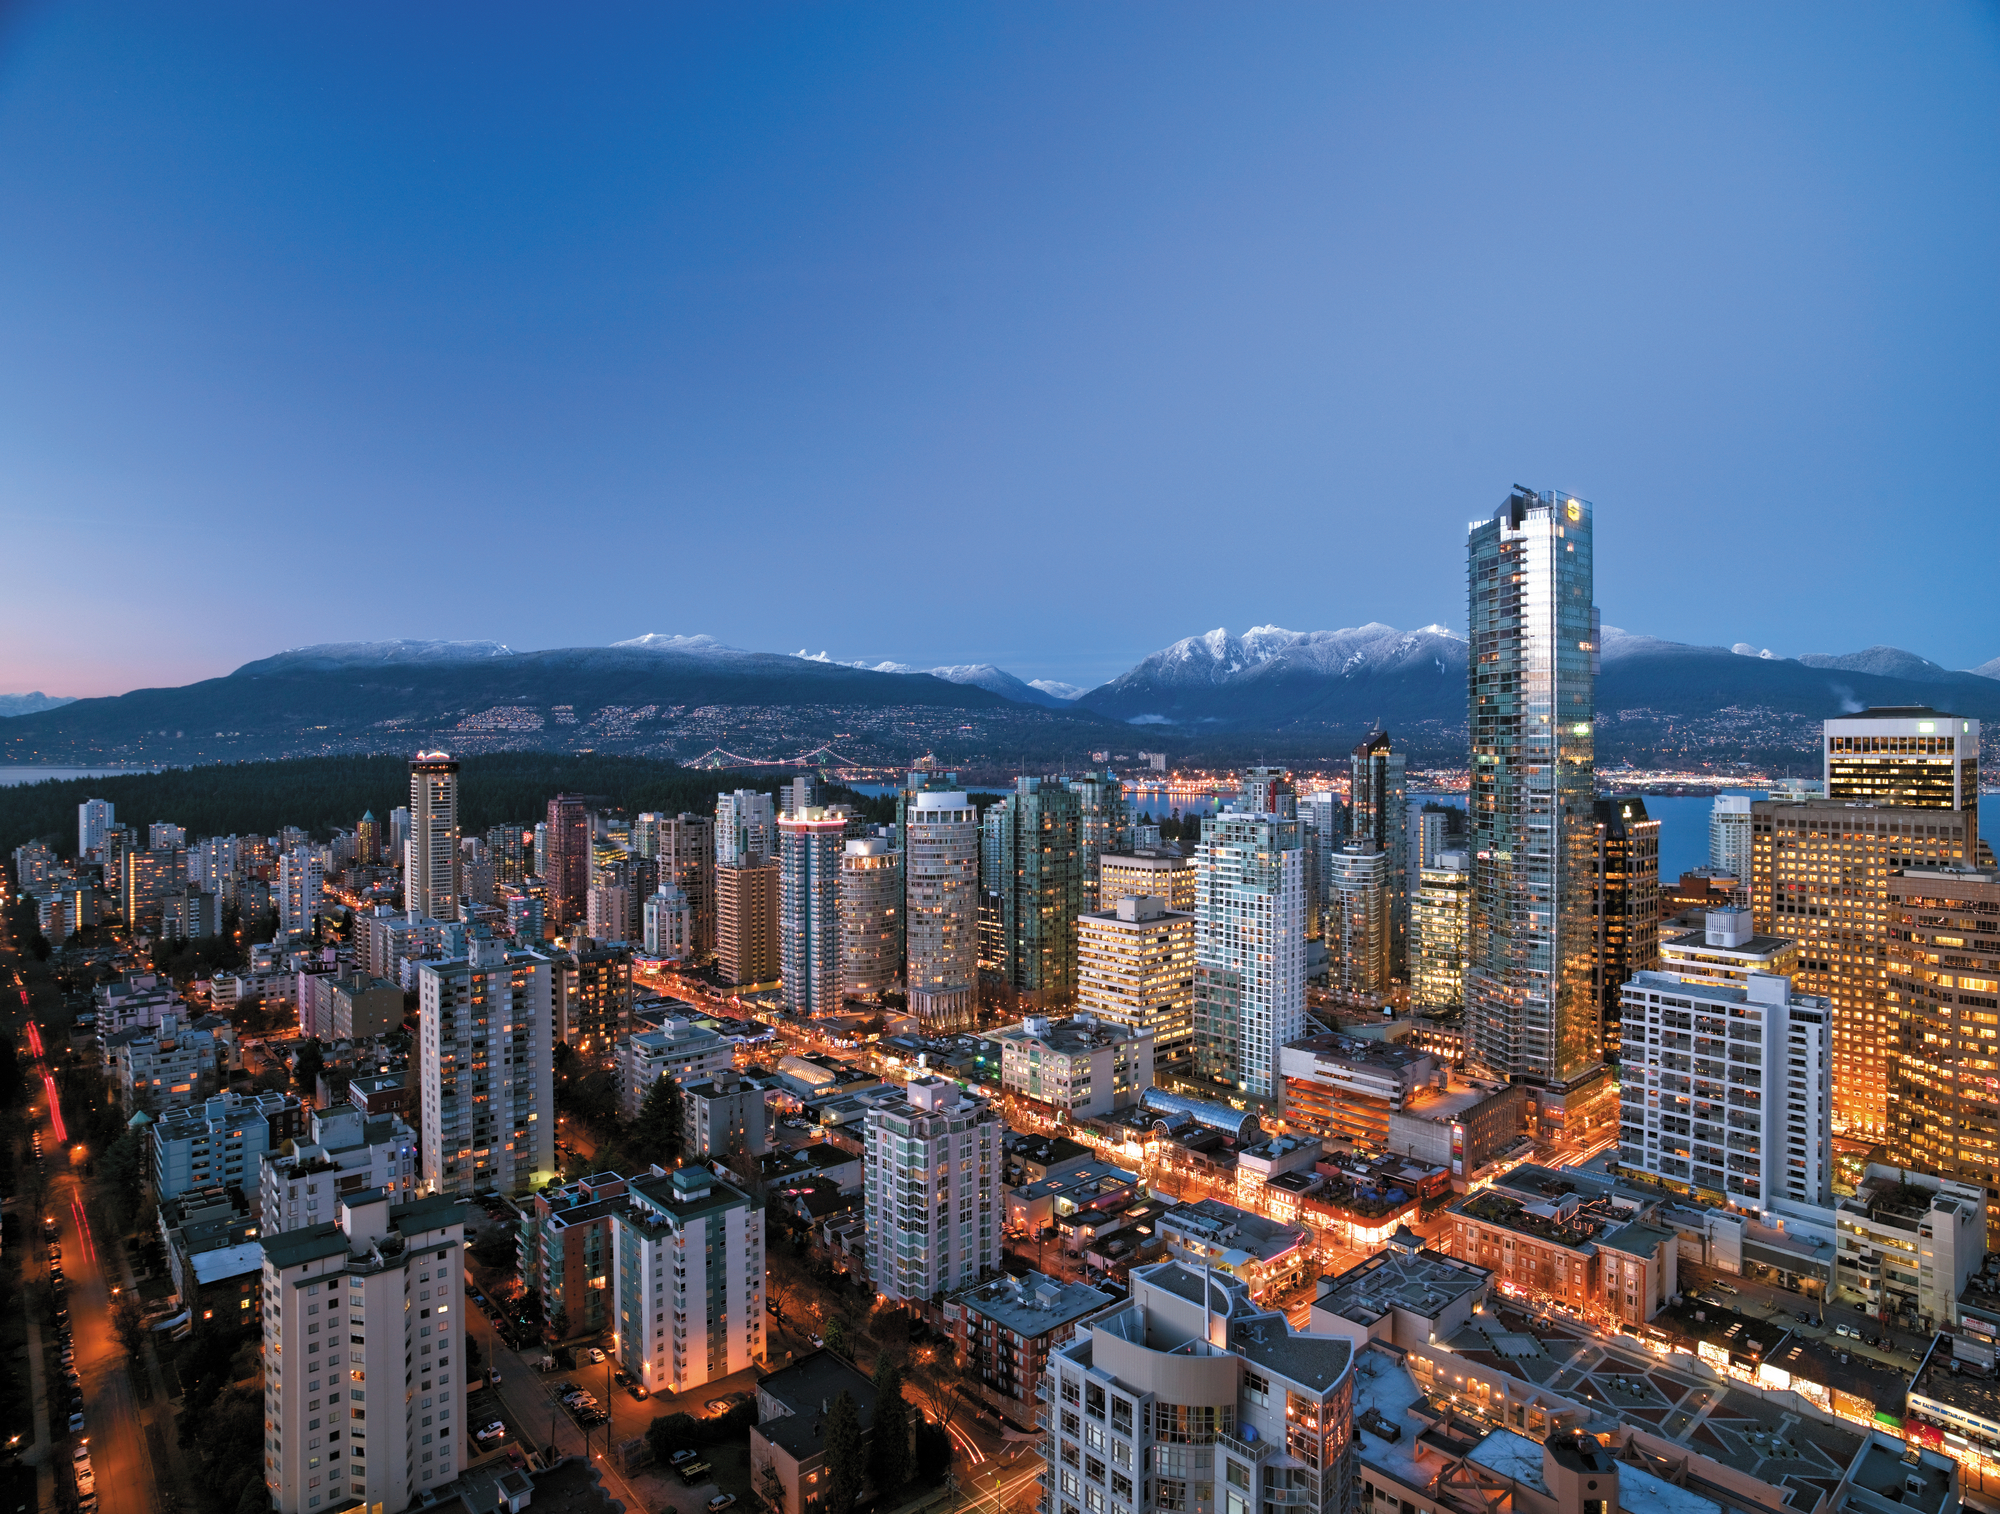 Evening view of skyline of Vancouver with snow on mountains.